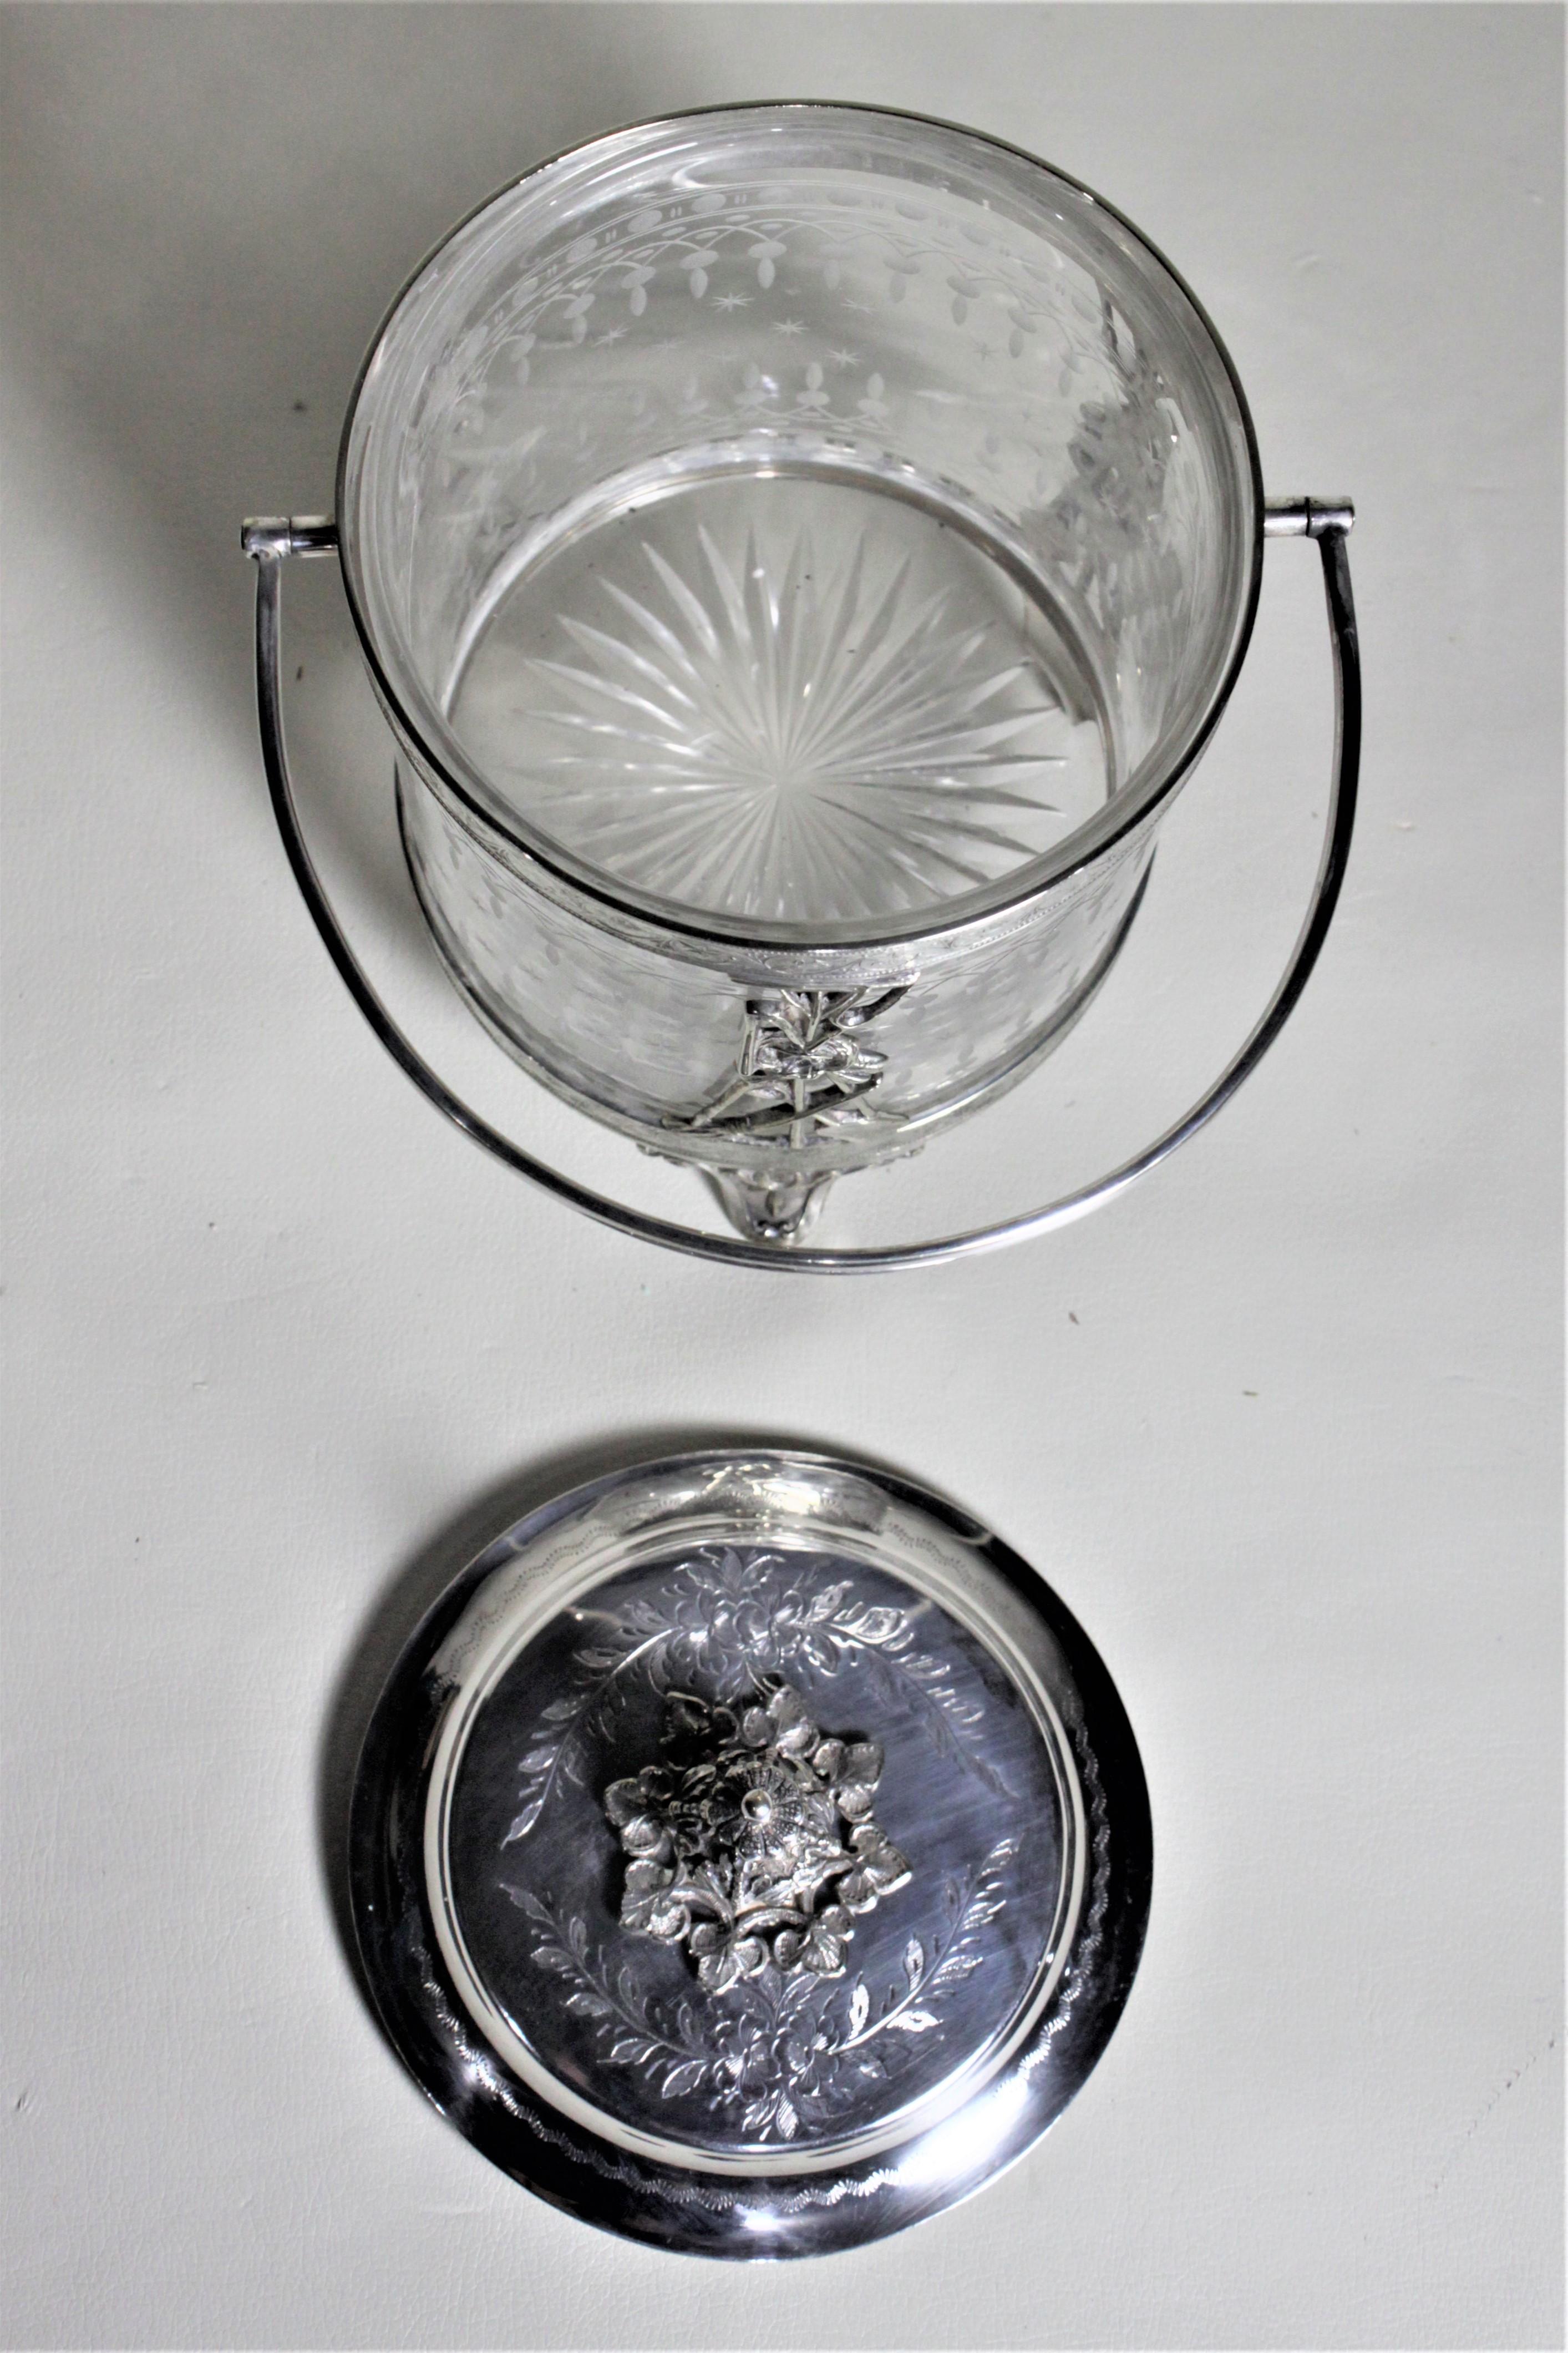 20th Century Antique Silver Plated Biscuit Barrel with Figural Decor & Etched Glass Insert